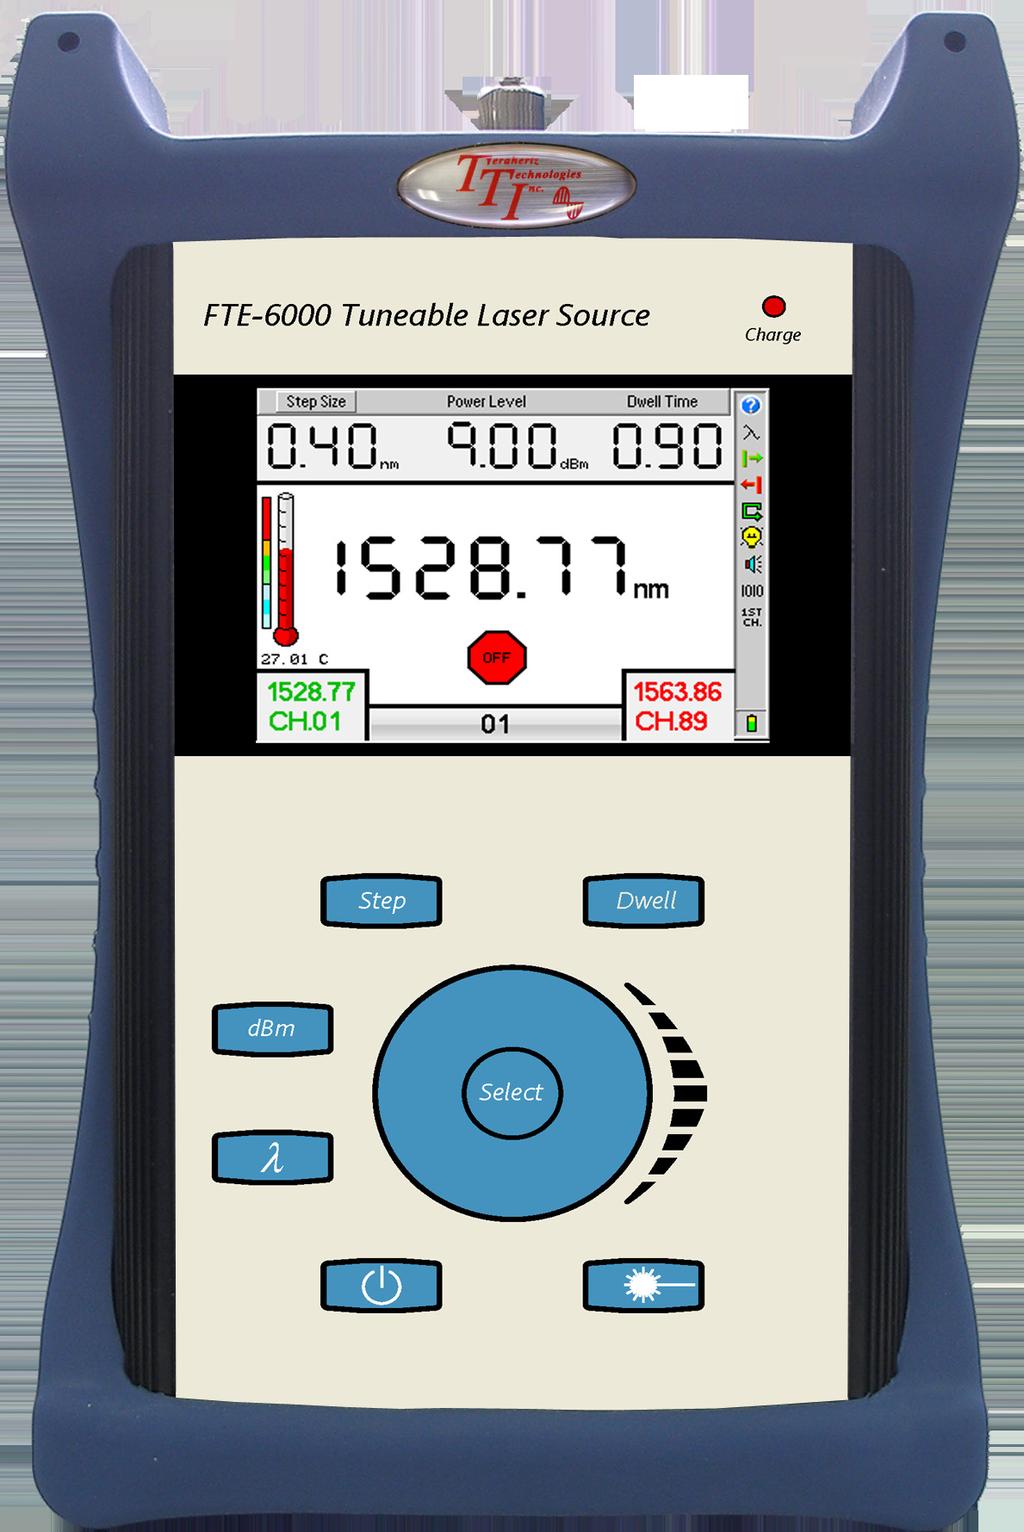 FTE-6000 Tunable Laser Source TTI Hand Held Tuneable Laser Source The TLS is available in C and L Bands up to 88 channels on the ITU Grid with channel Spacing down to 50 GHz.